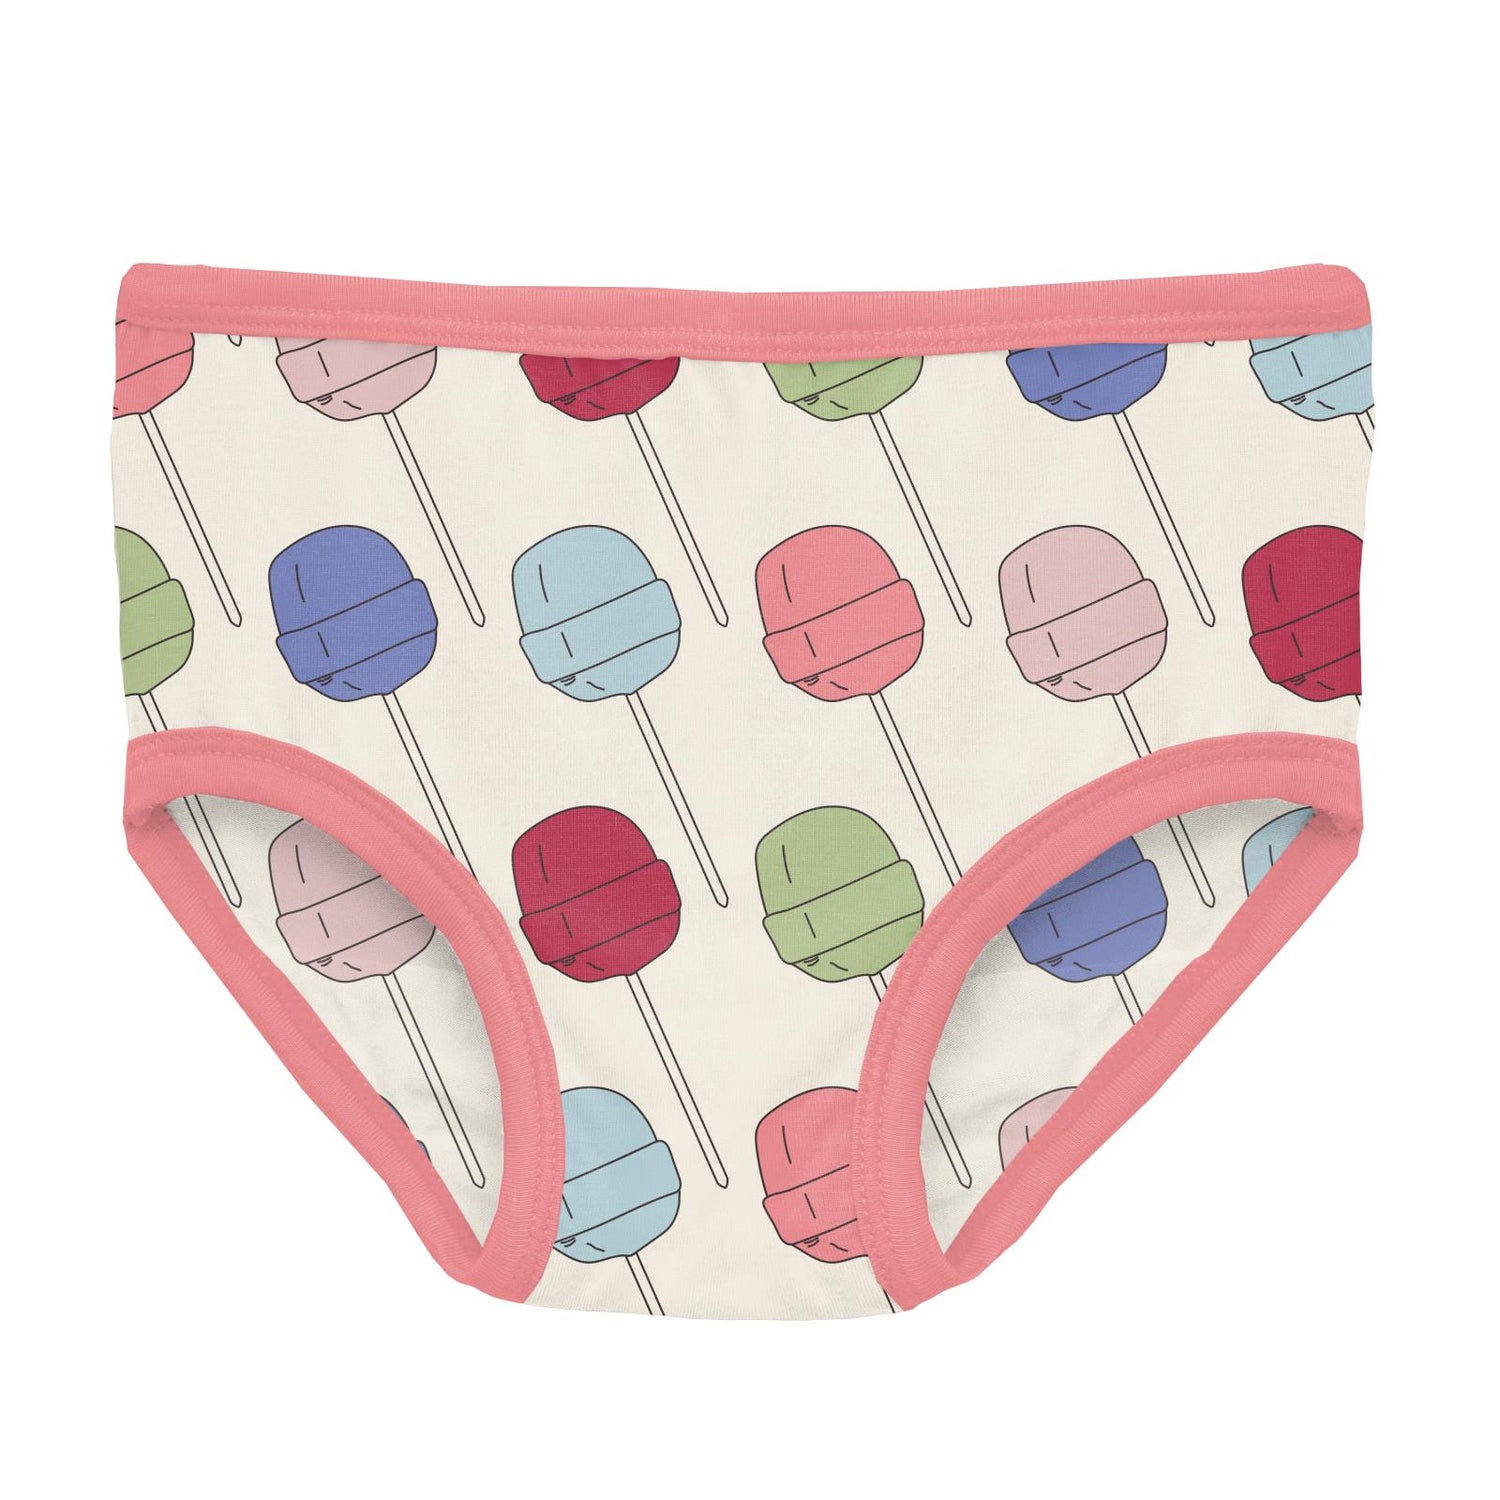 Print Girl's Underwear Set of 3 in Lula's Lollipops, Pewter & Baby Rose Too Many Stuffies